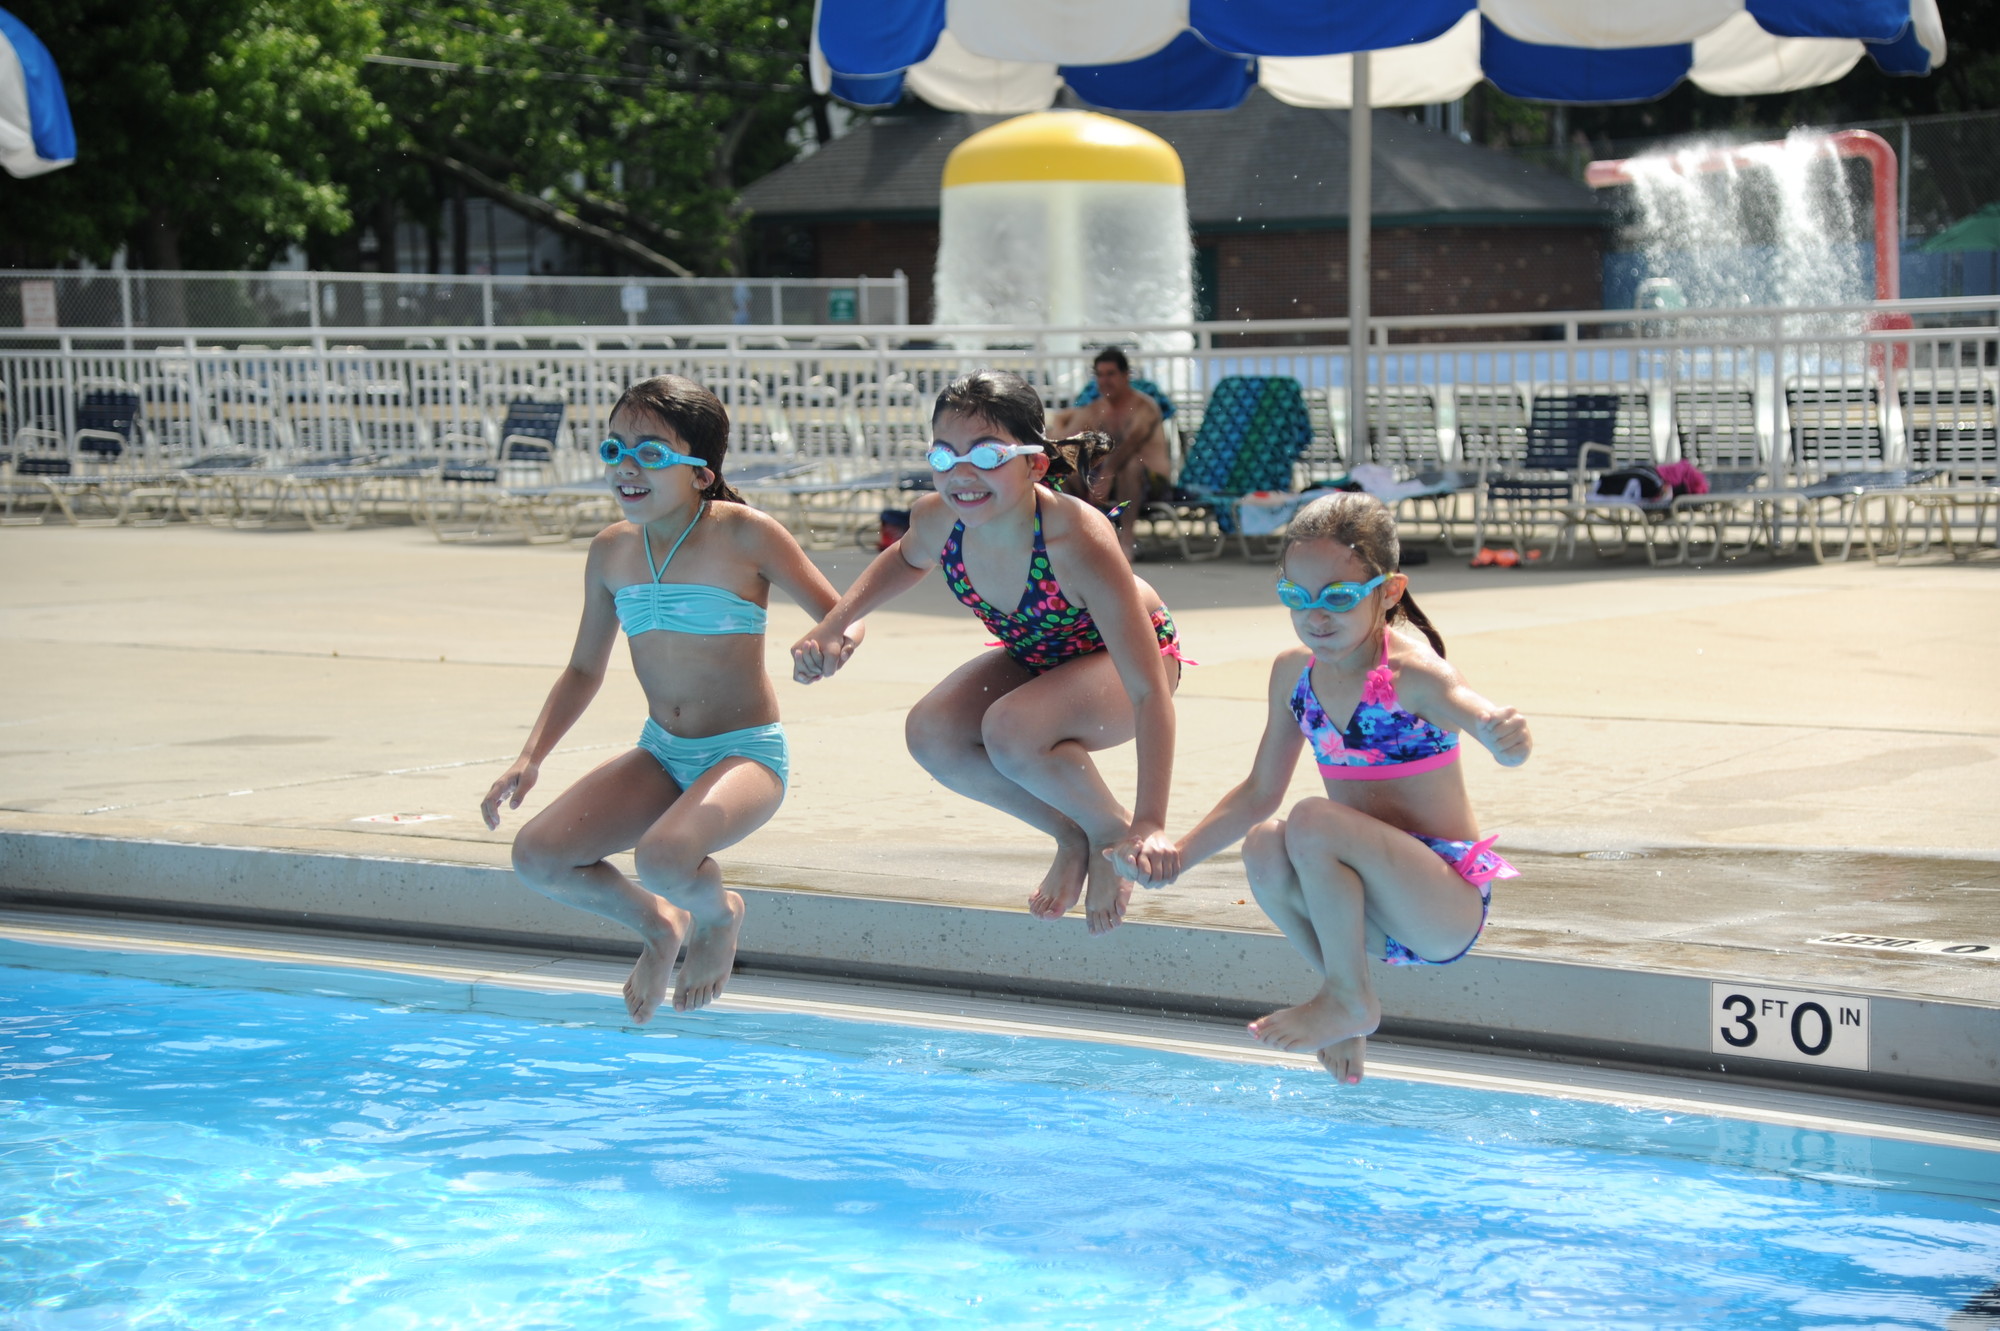 Isabella Pichardo, 9, left, Olivia Pichardo, 7, and Alexandra Marsella, 8, were among the first swimmers of the season at the Valley Stream pool, which opened Saturday morning.